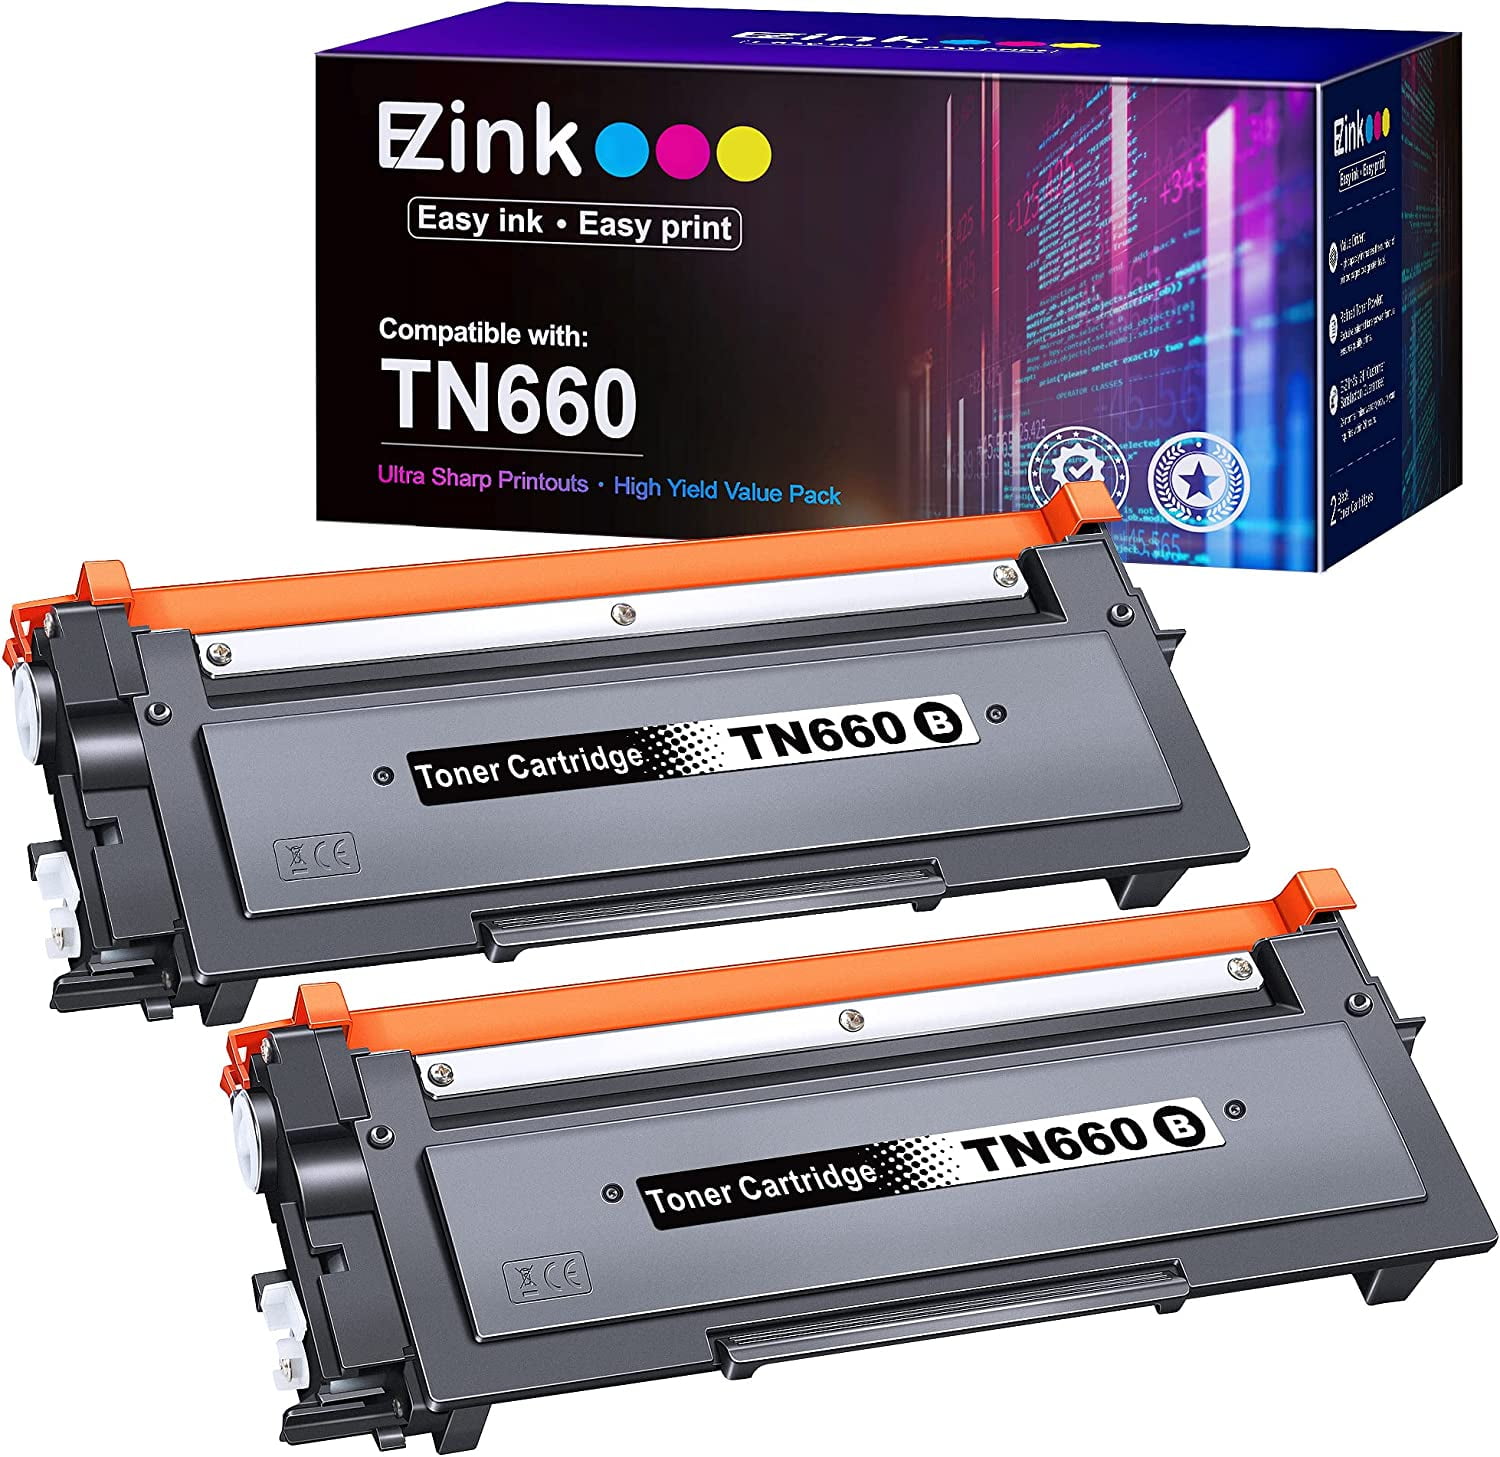 E-Z Ink TN-660 Compatible Toner Cartridge Replacement for Brother TN660 TN630 High Compatible HL-L2300D HL-L2380DW HL-L2320D DCP-L2540DW MFC-L2700DW MFC-L2685DW (Black, 2-Pack) - Walmart.com